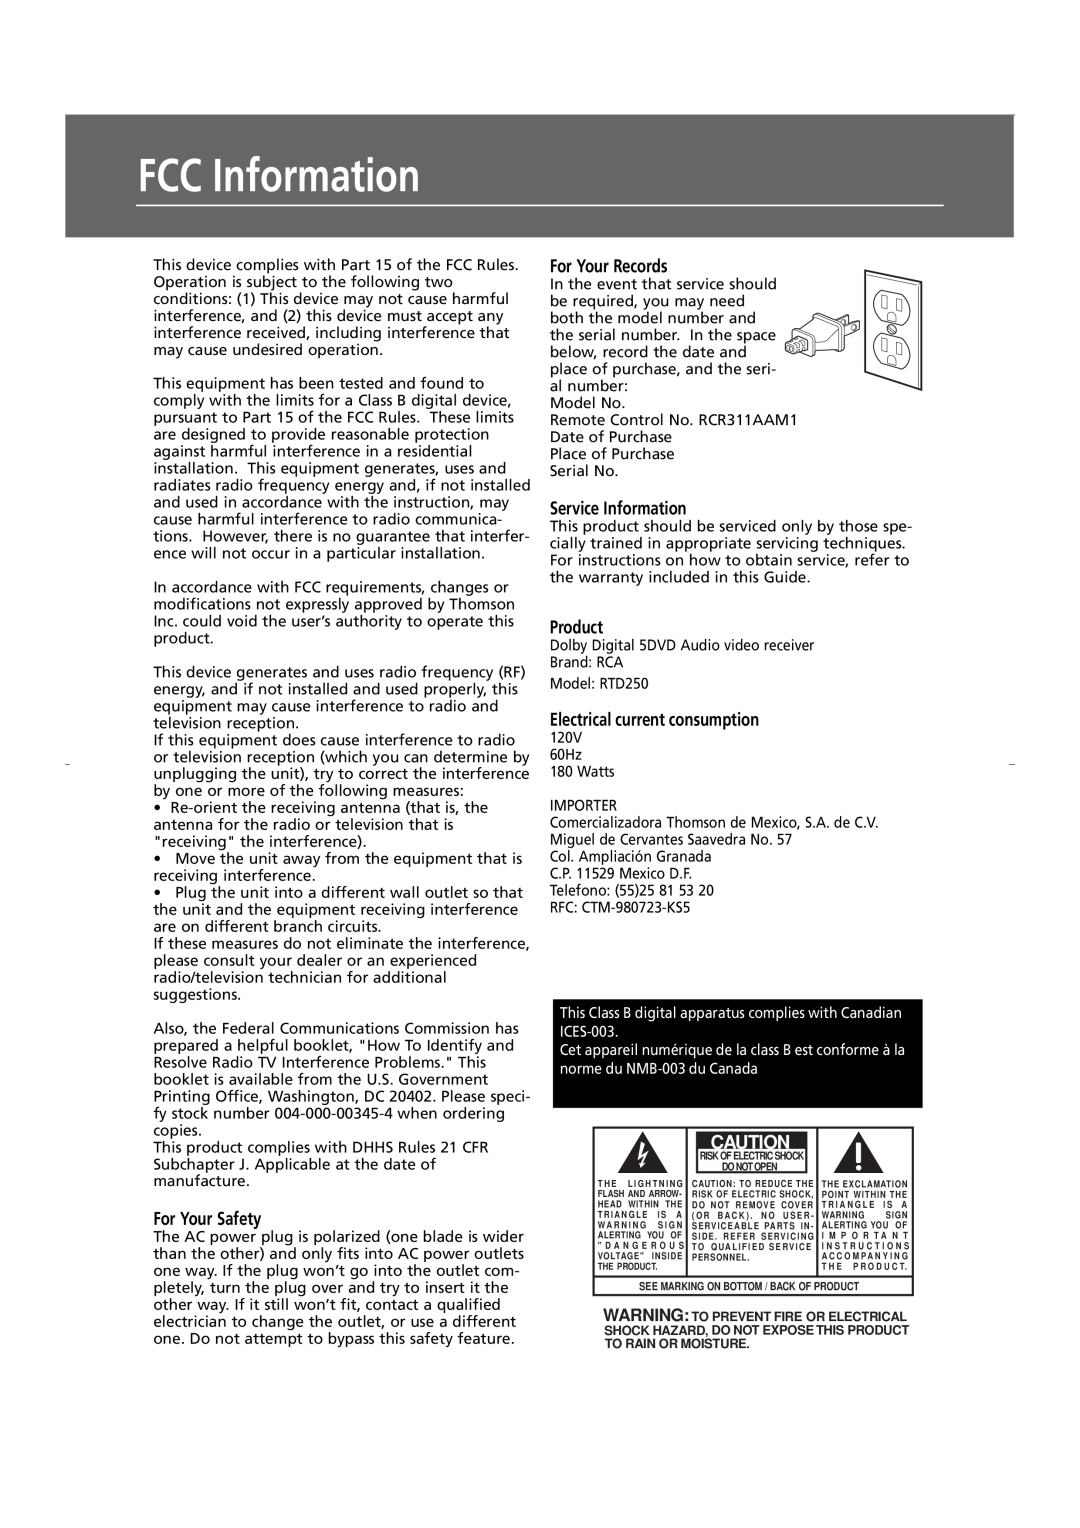 RCA RTD250 user manual FCC Information, For Your Safety, For Your Records, Service Information, Product 